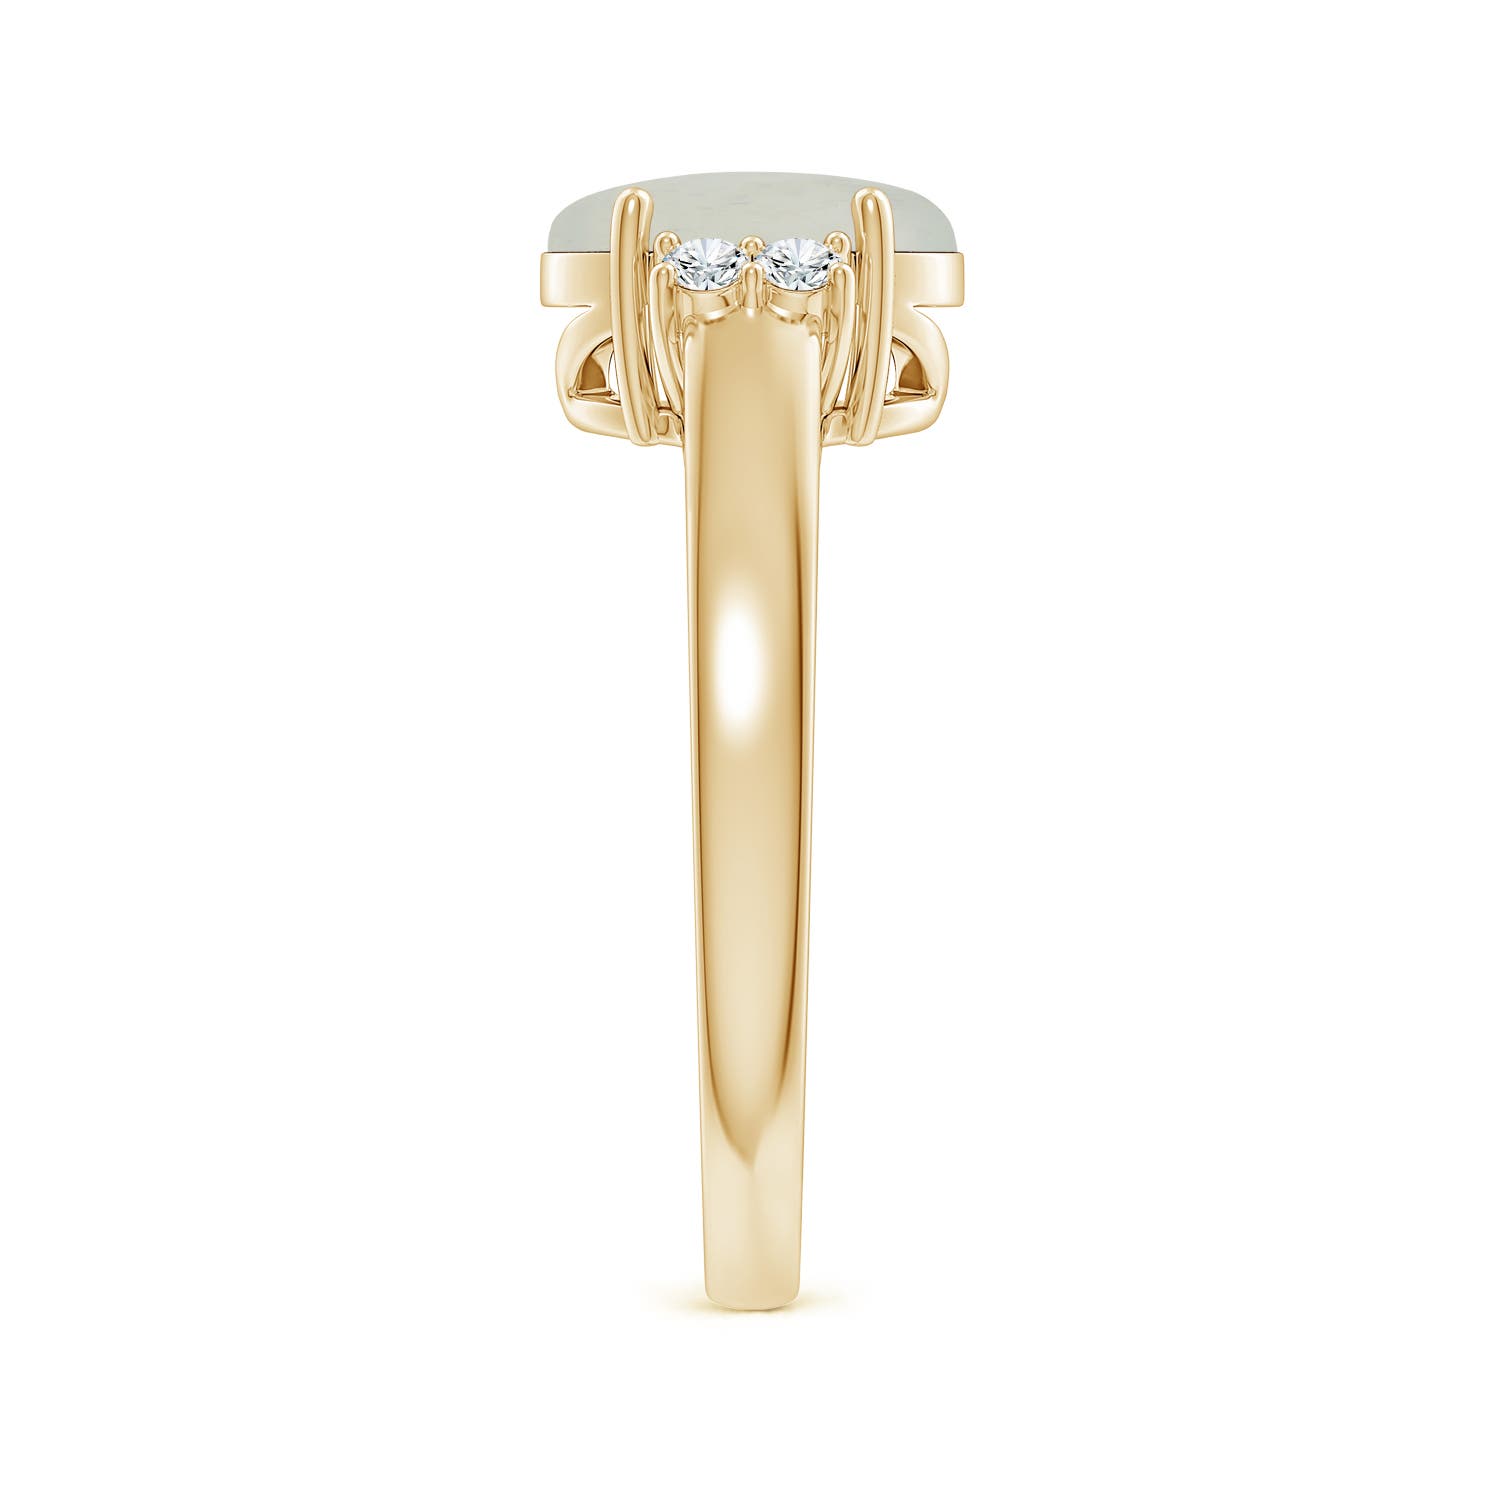 A - Moonstone / 1.8 CT / 14 KT Yellow Gold